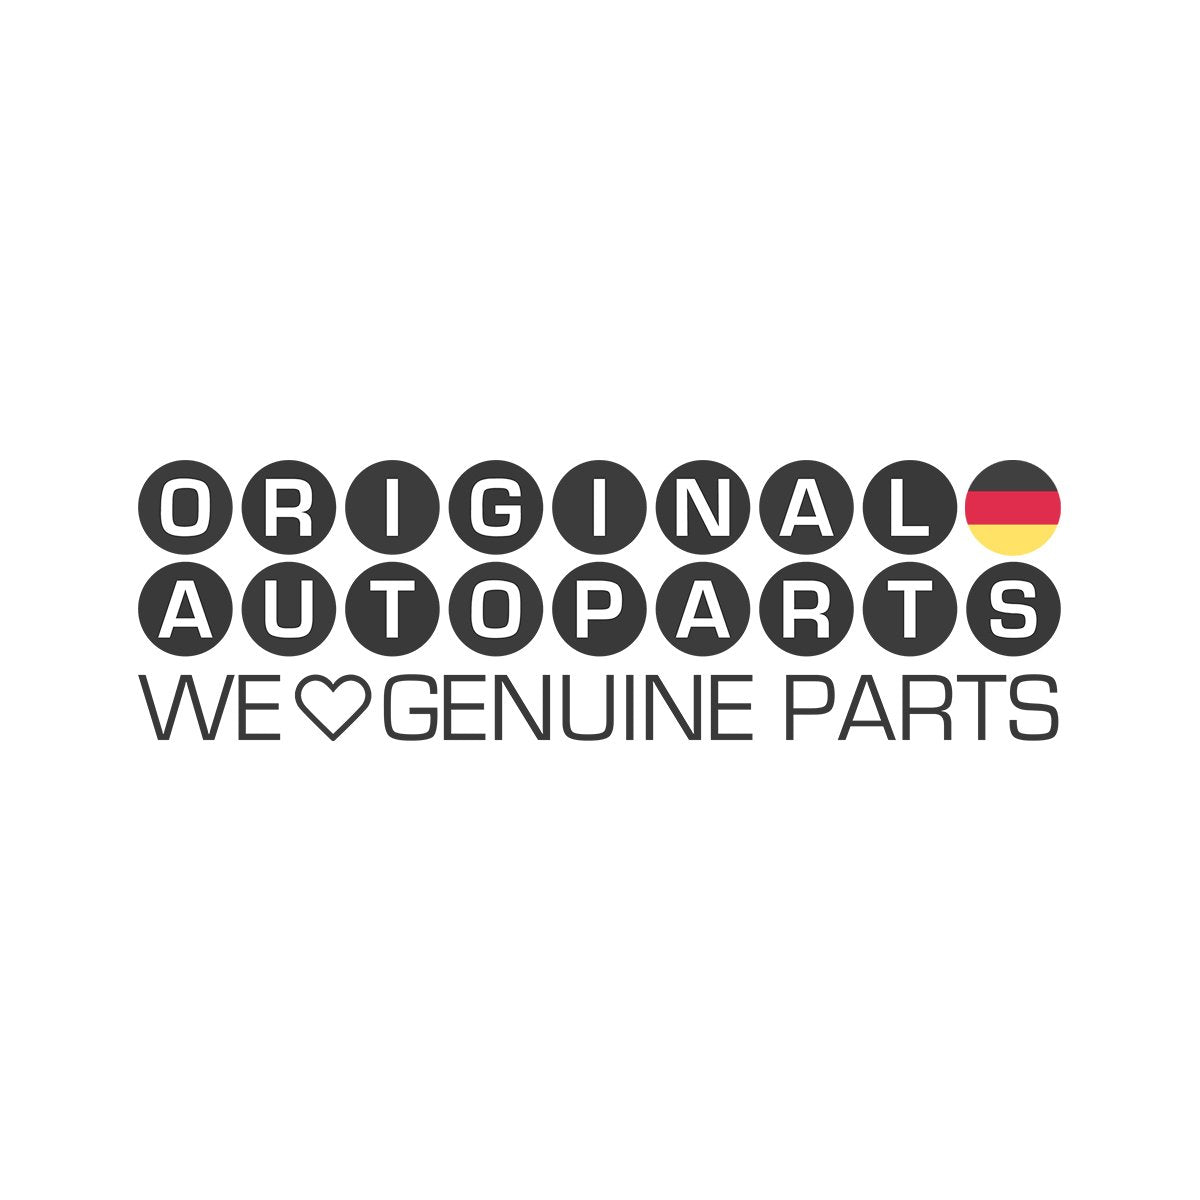 Genuine BMW BRAKE DISC ROTOR 34111119248 NO LONGER AVAILABLE, NEW CODE 34111163128